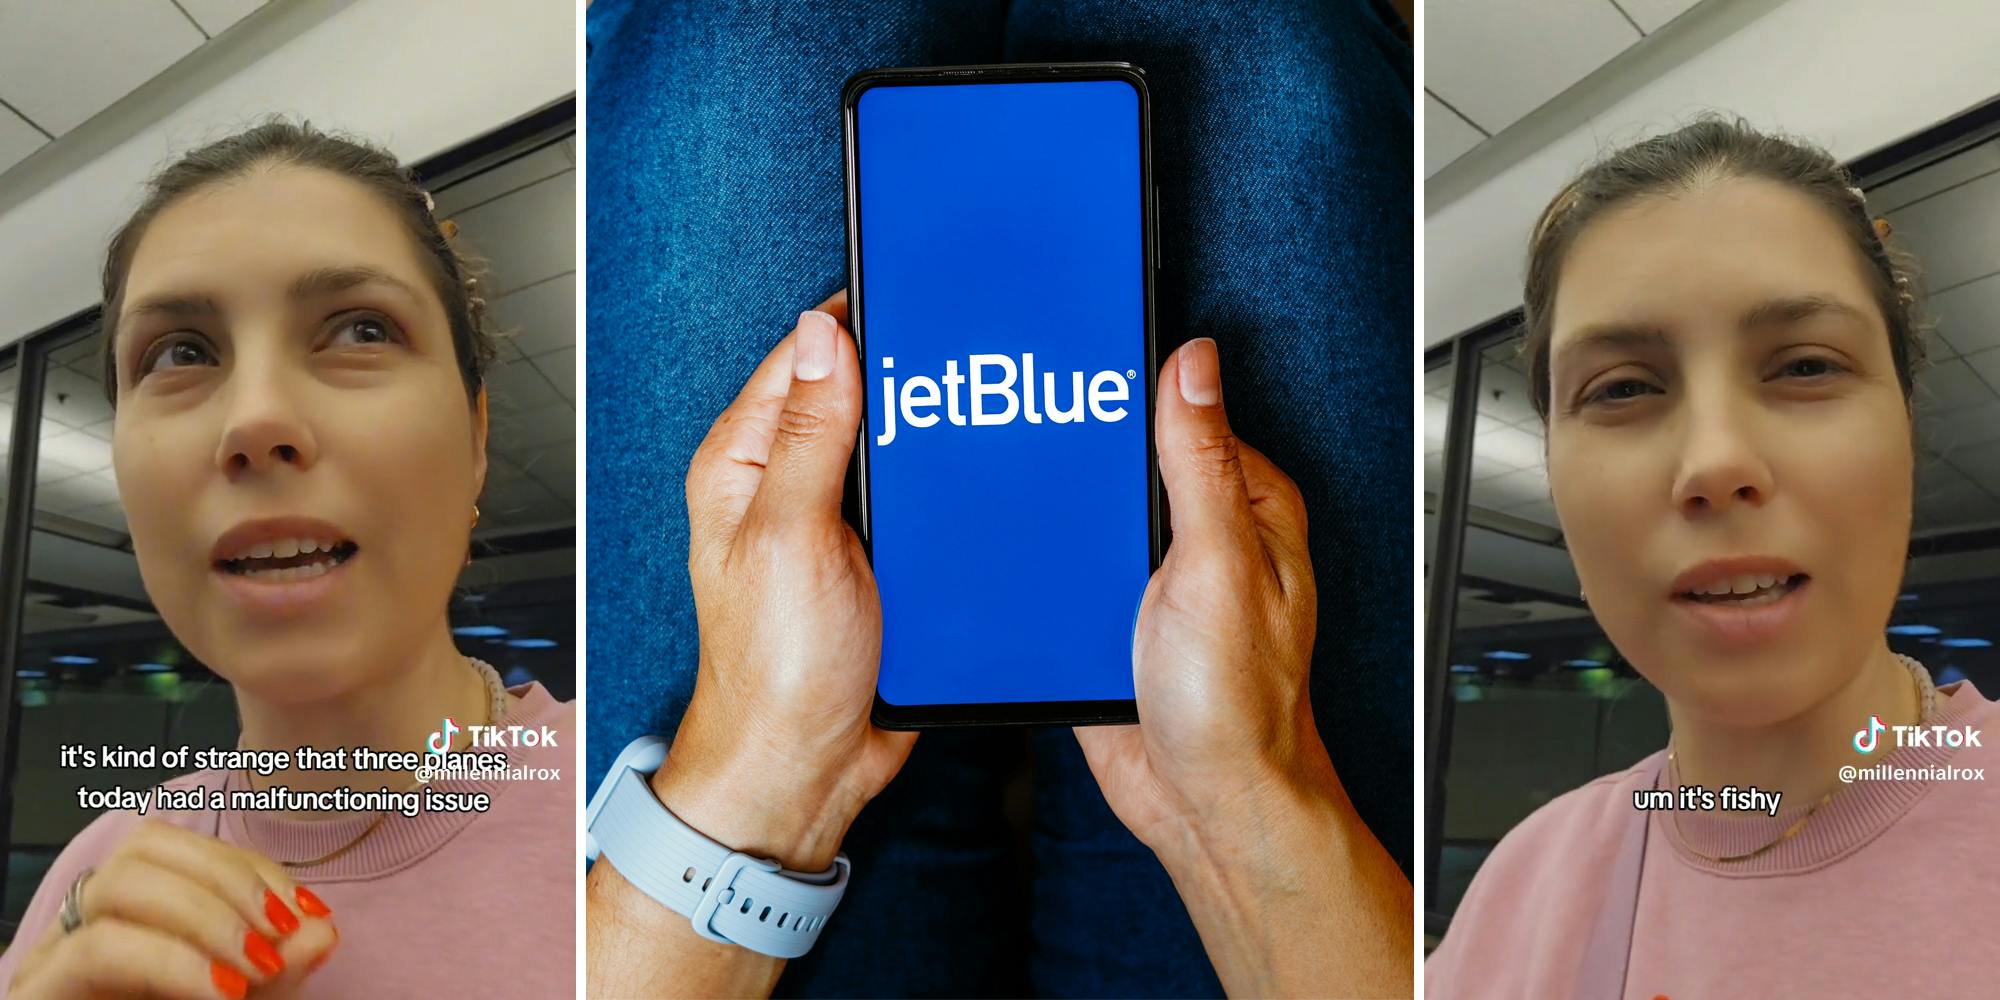 woman with caption "it's kind of strange that three planes today had a malfunctioning issue" (l) person holding phone with jetBlue logo (c) woman with caption "um it's fishy" (r)